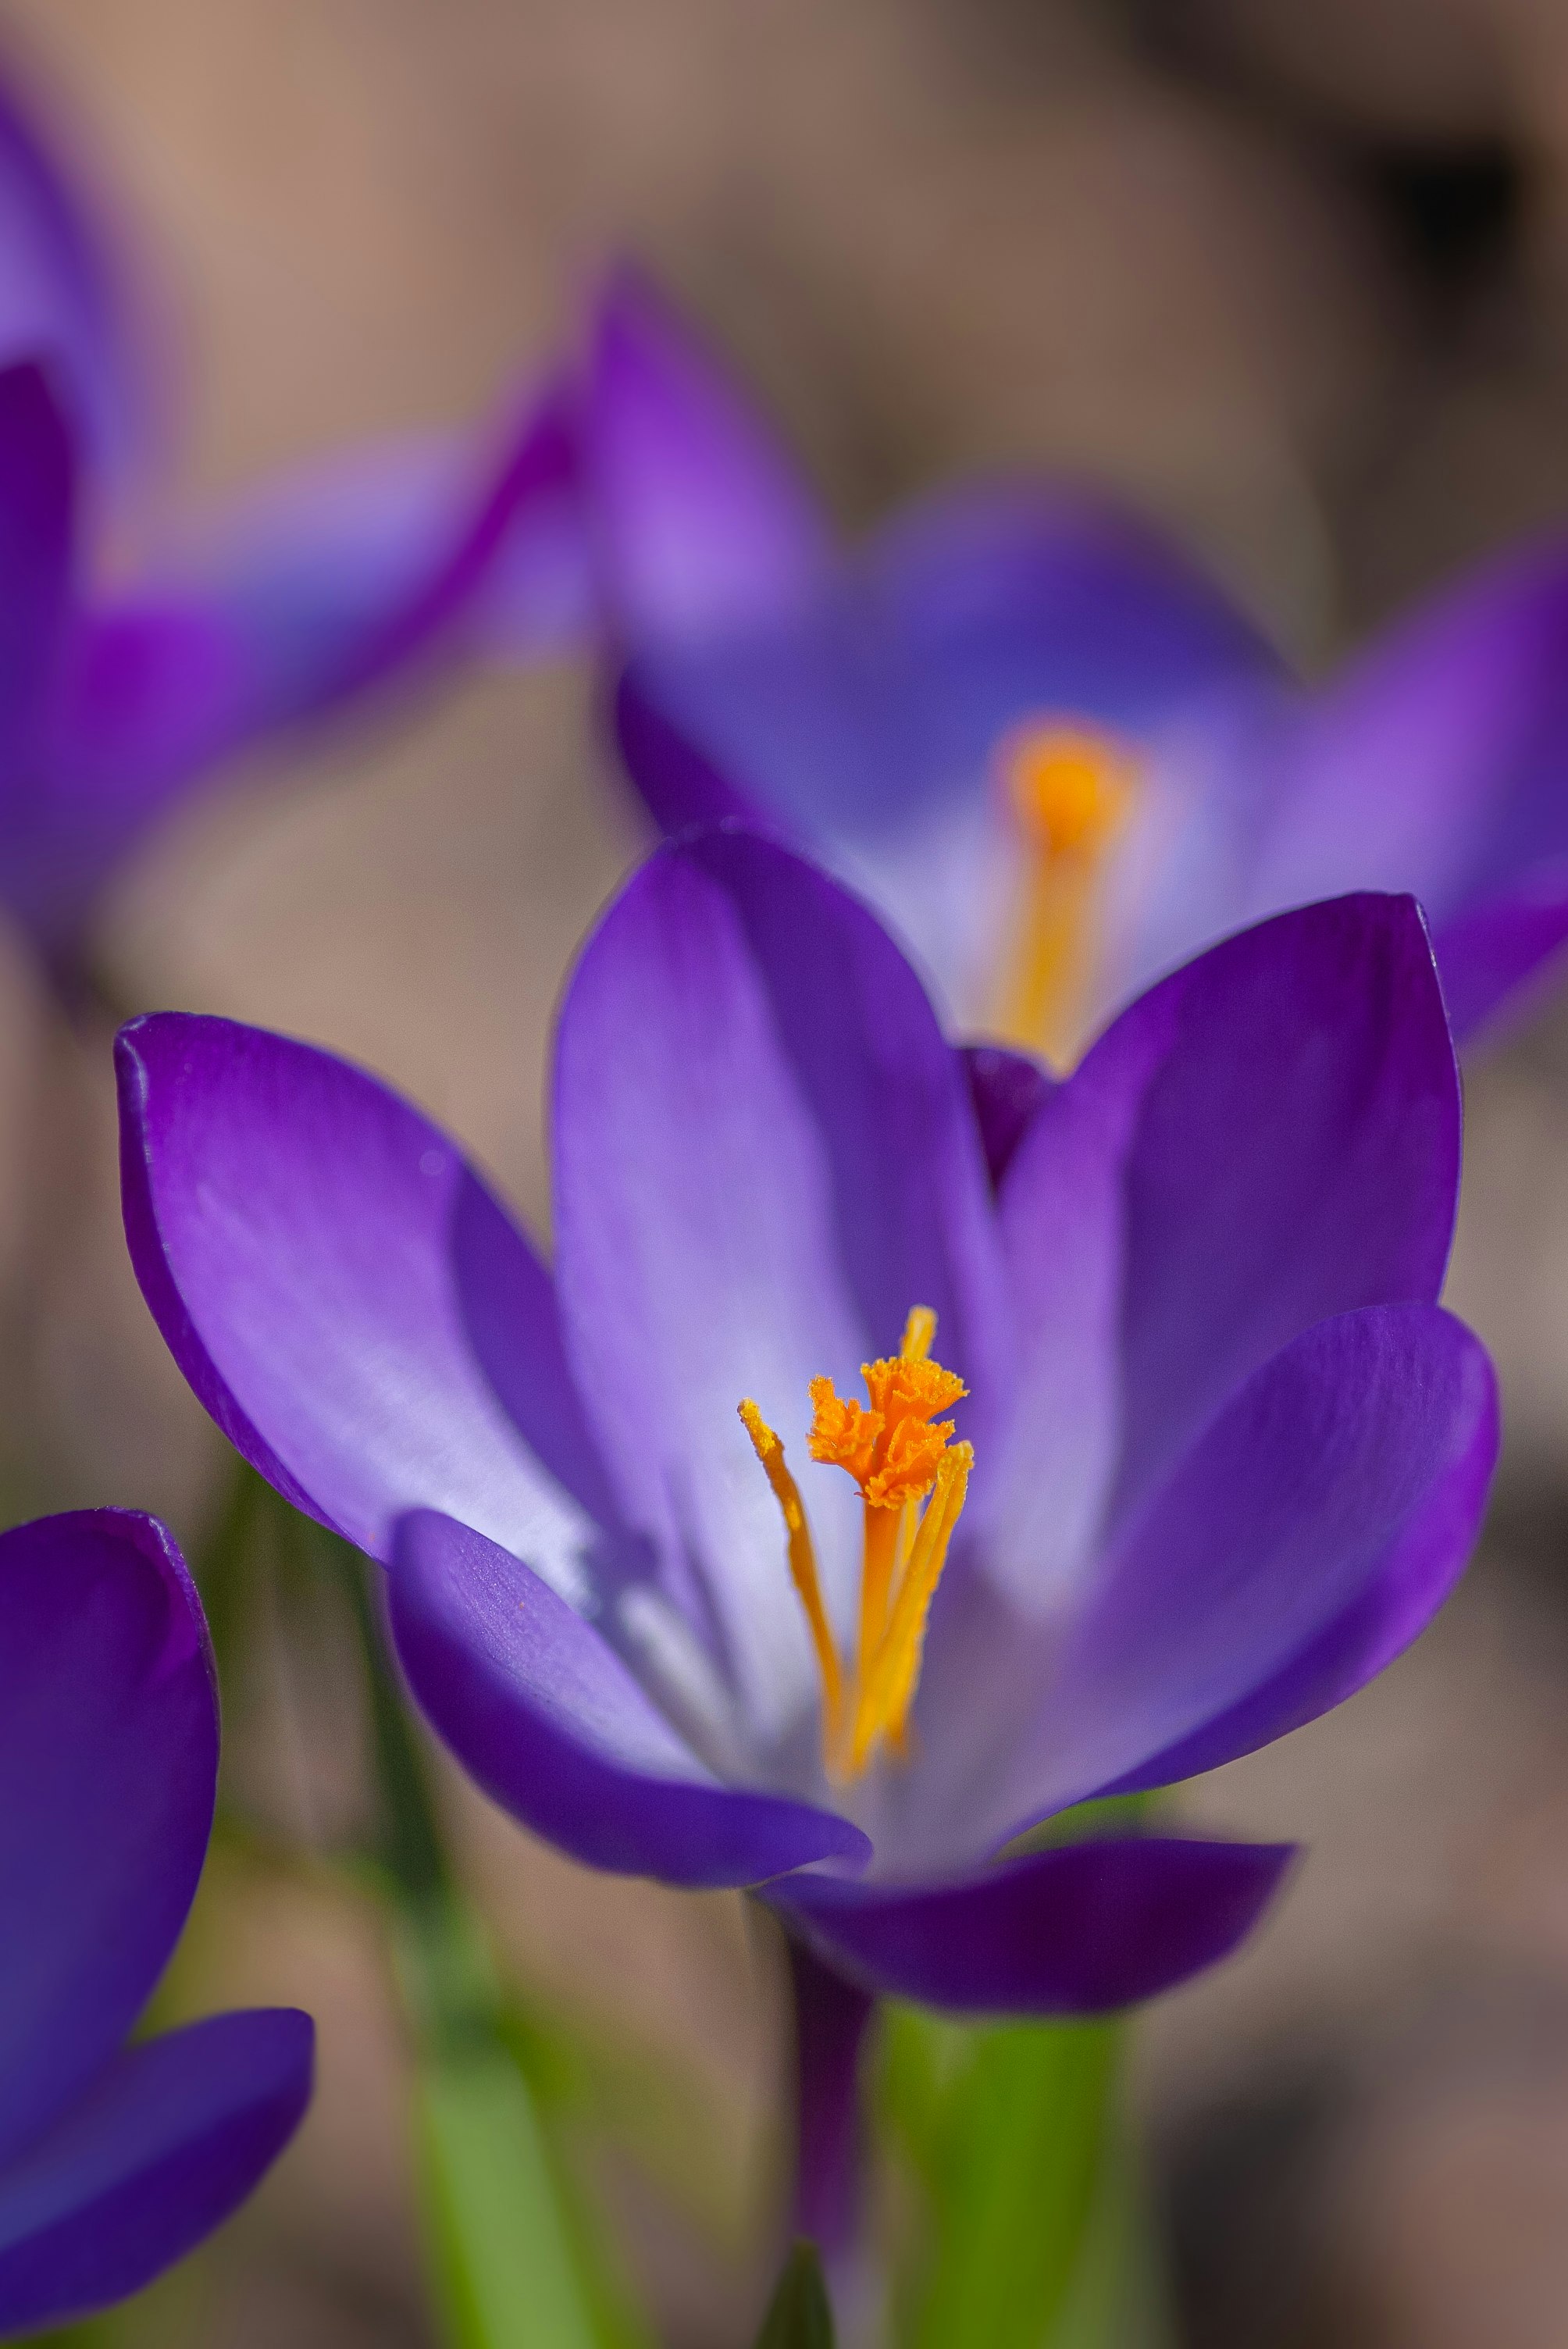 purple crocus in bloom in close up photography